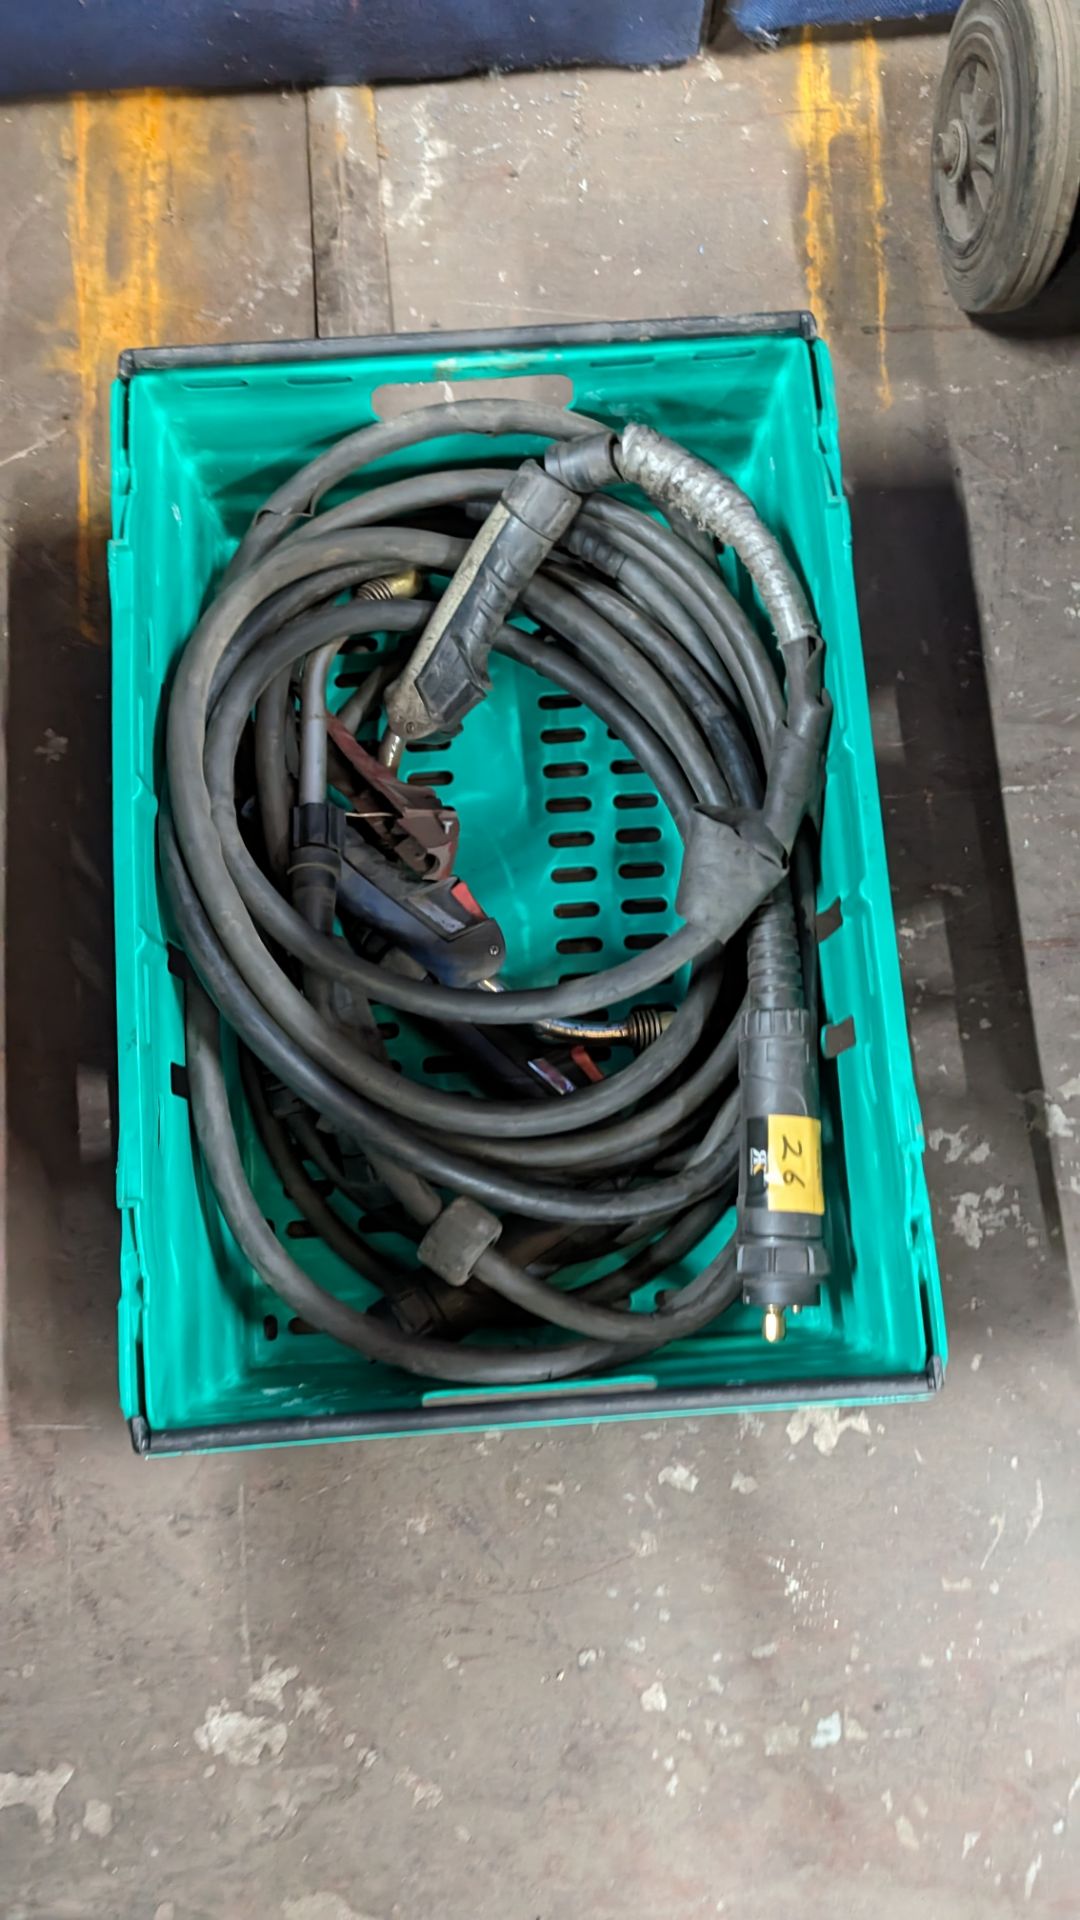 Quantity of welding related torches - the contents of the crate